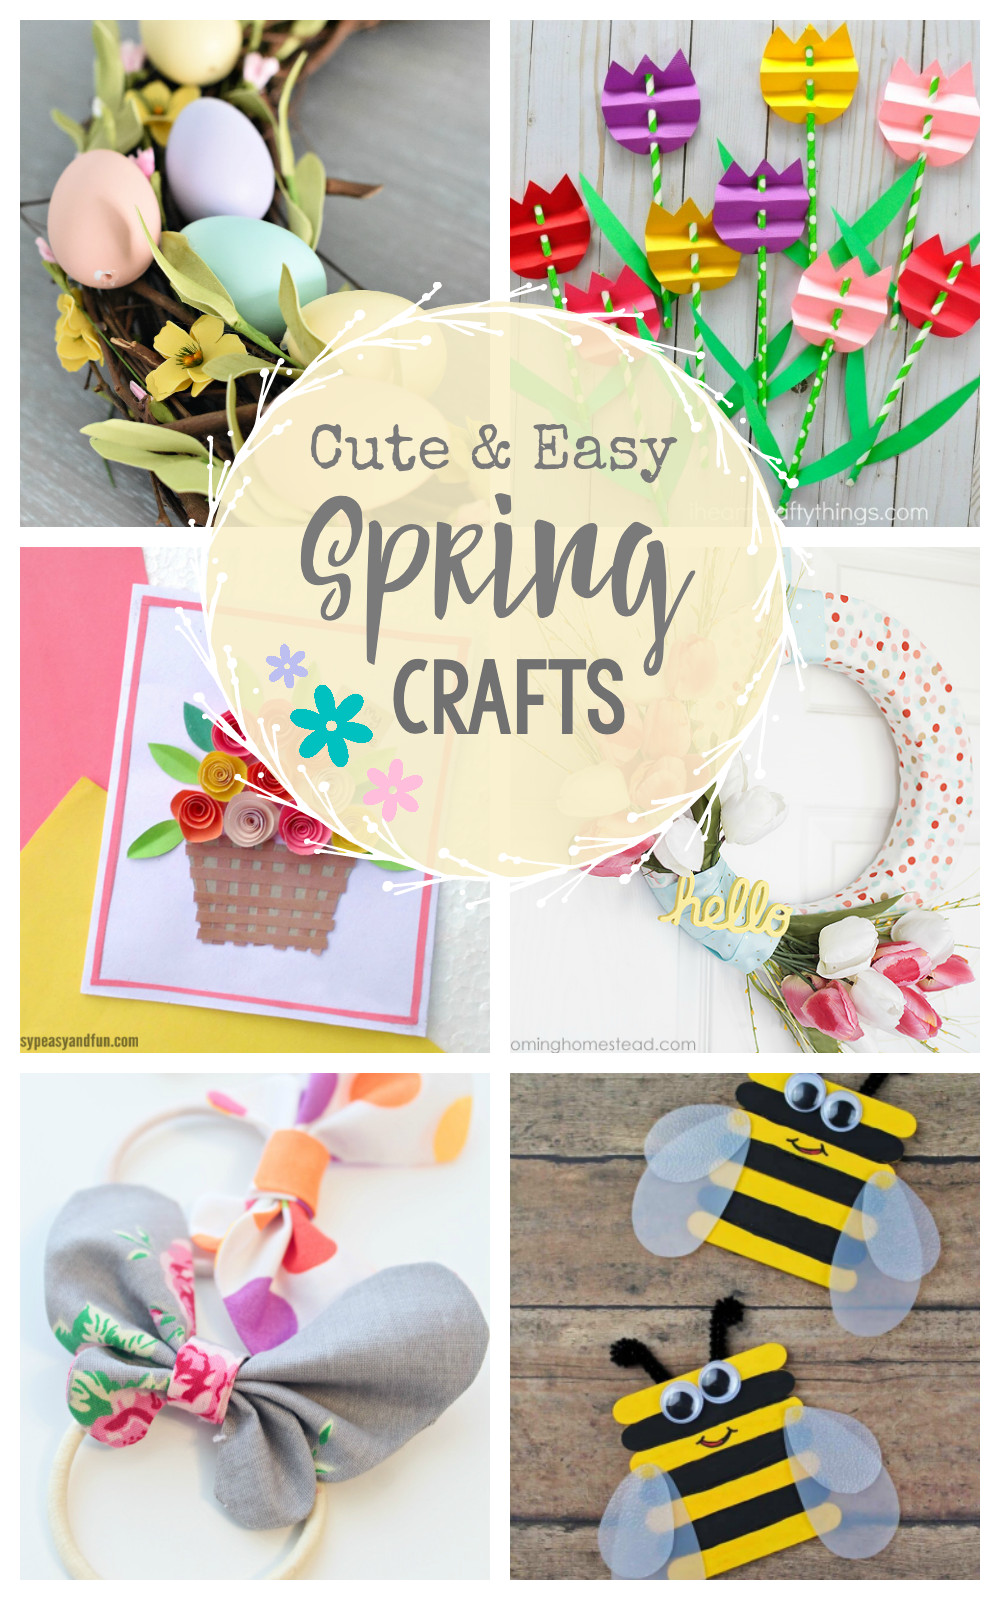 Easy Craft Gifts
 Cute & Easy Spring Crafts to Make Crazy Little Projects